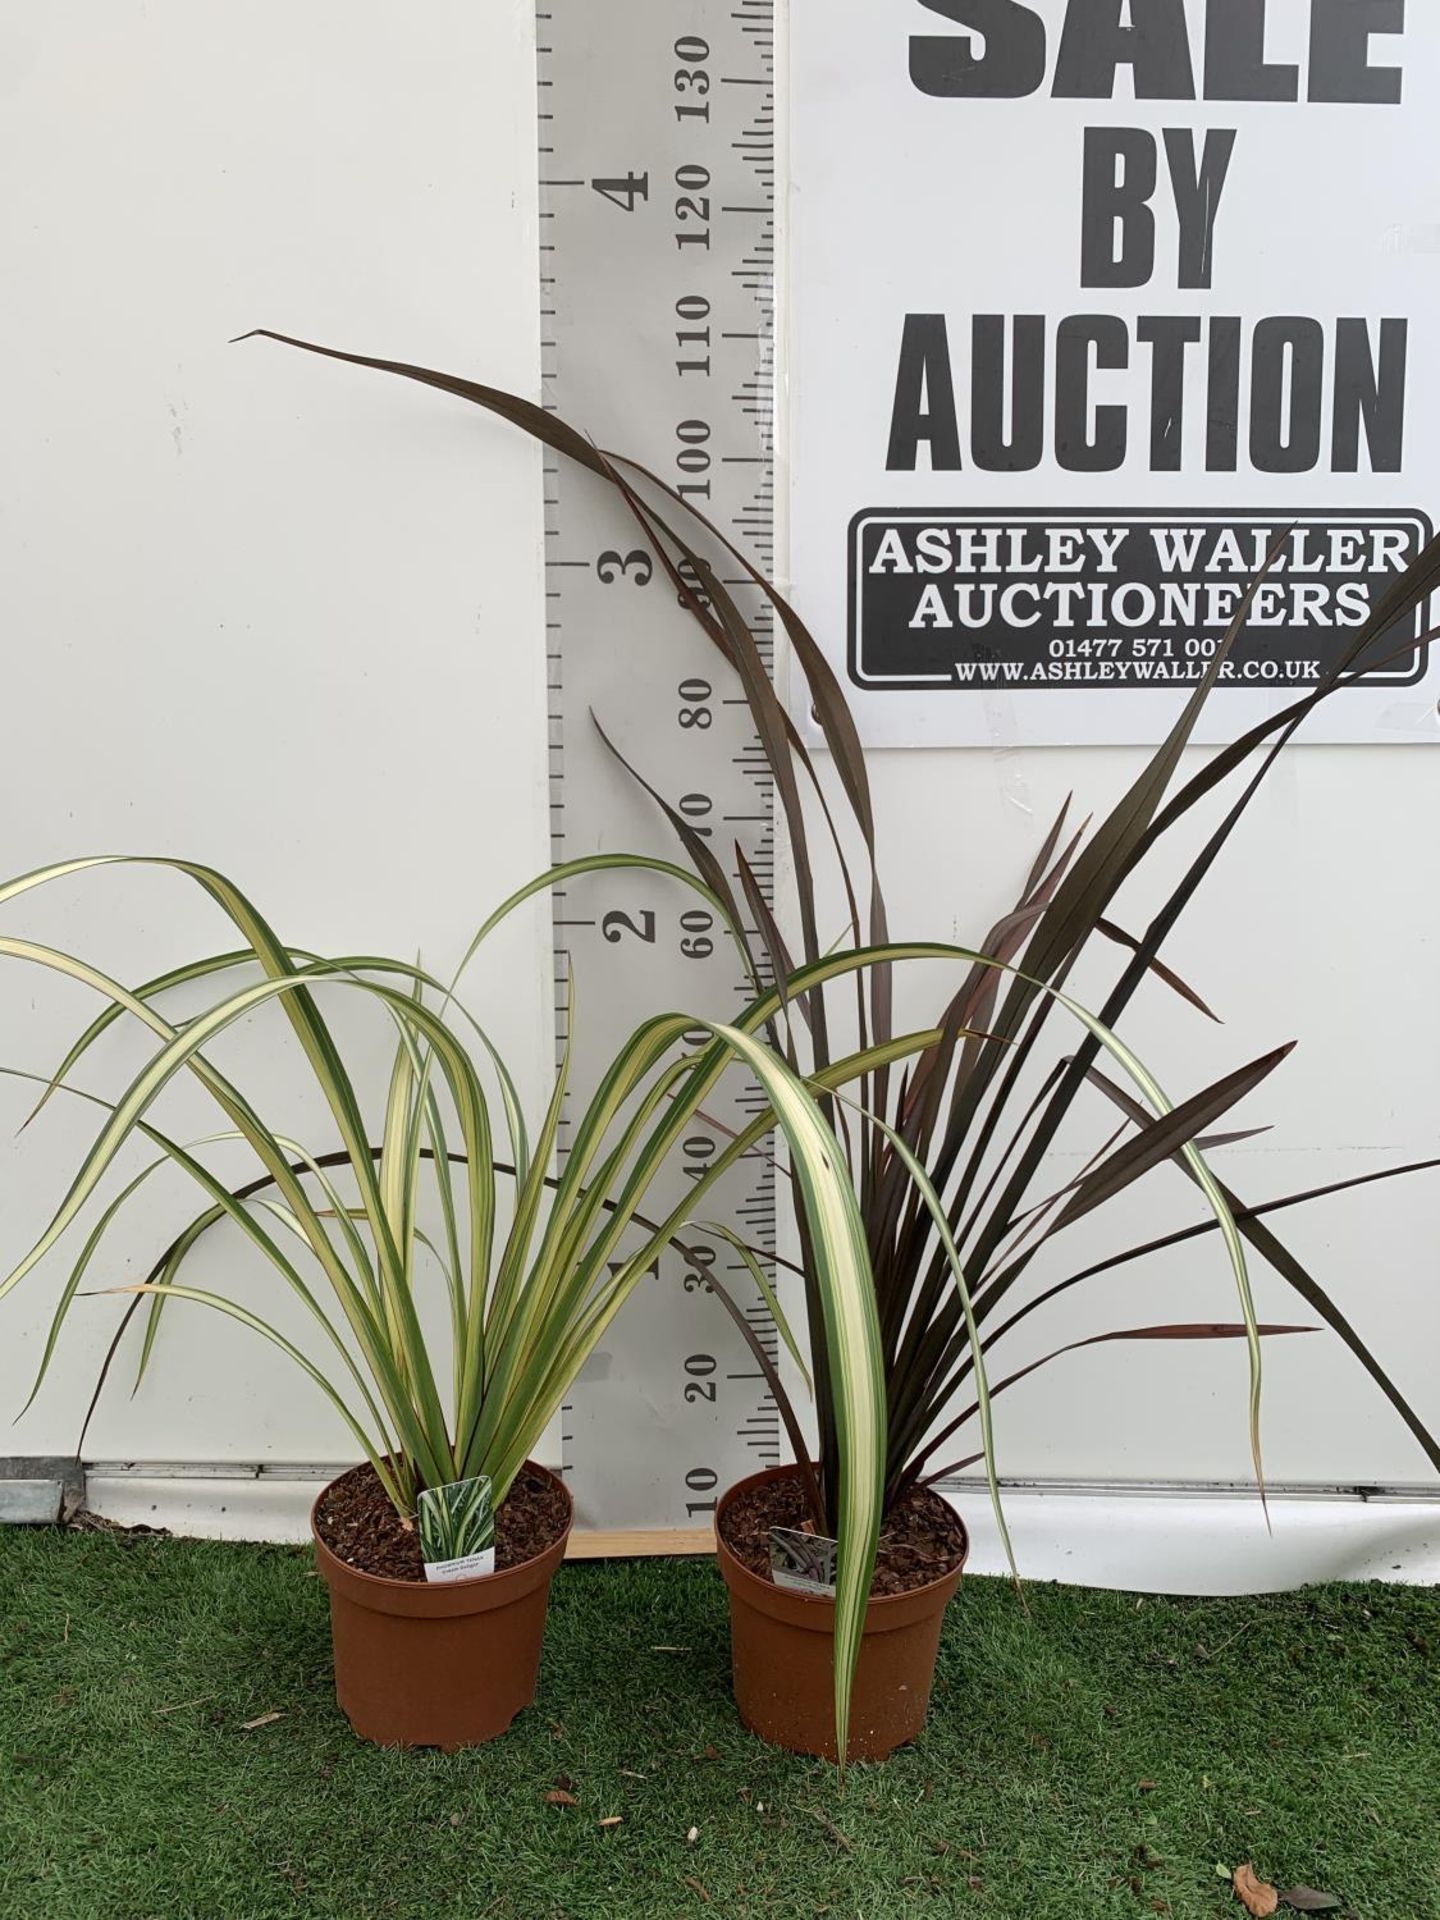 TWO PHORMIUM TENAX 'CREAM DELIGHT' AND 'PLATTS BLACK' IN 3LTR POTS APPROX 80CM IN HEIGHT PLUS VAT TO